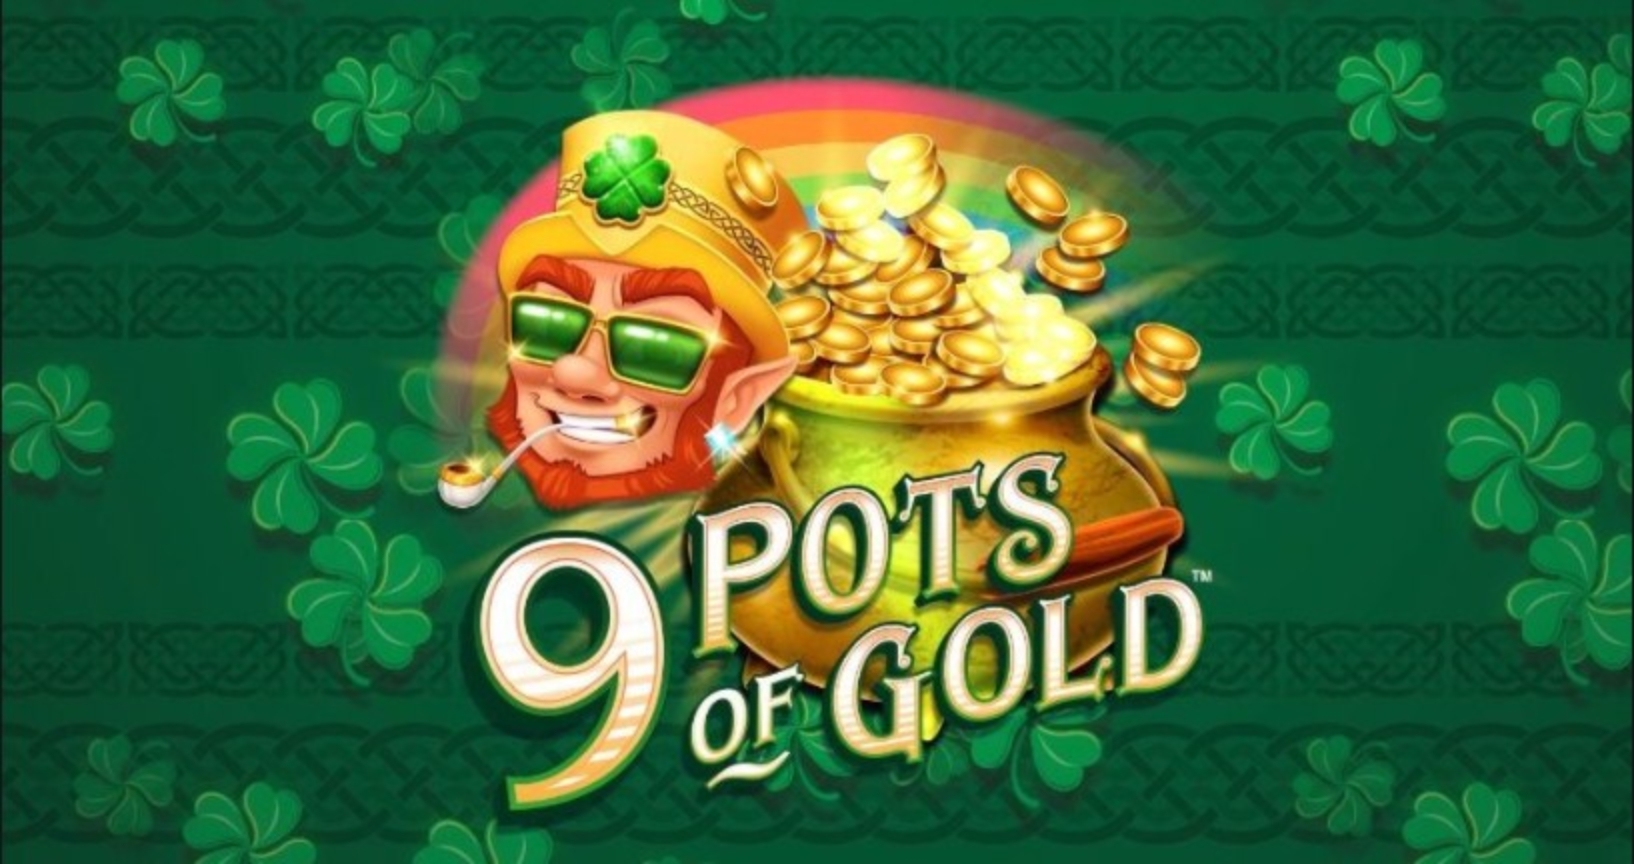 The 9 Pots of Gold Online Slot Demo Game by Gameburger Studios